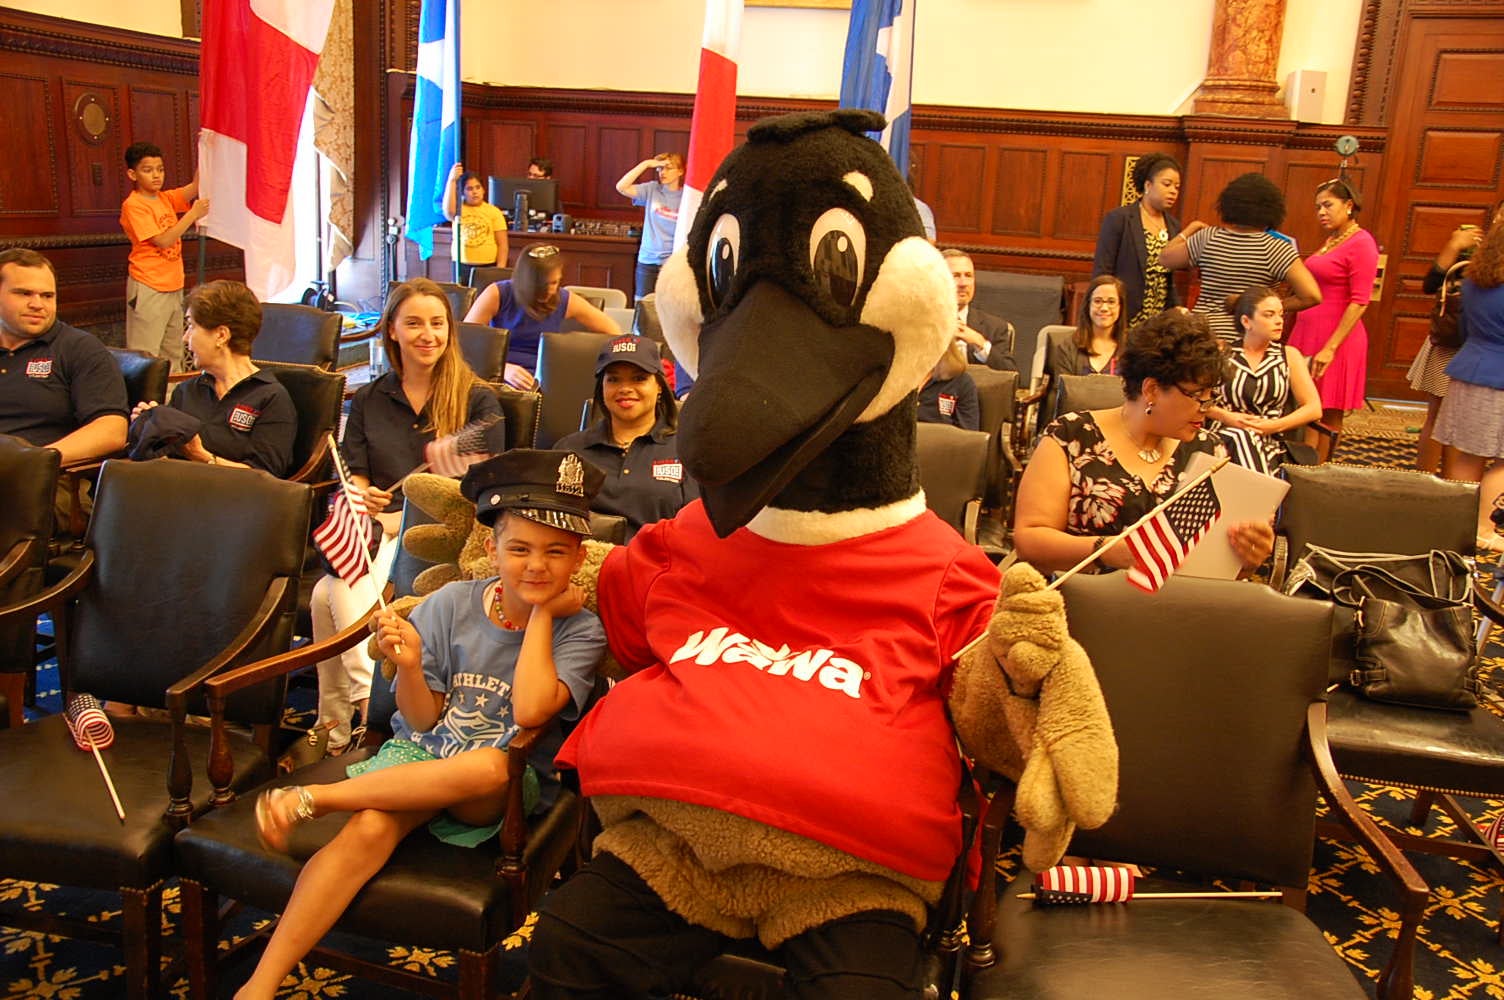 Wawa's mascot and a friend listen to the announcement of Welcome America activities.(Tom MacDonald/WHYY)